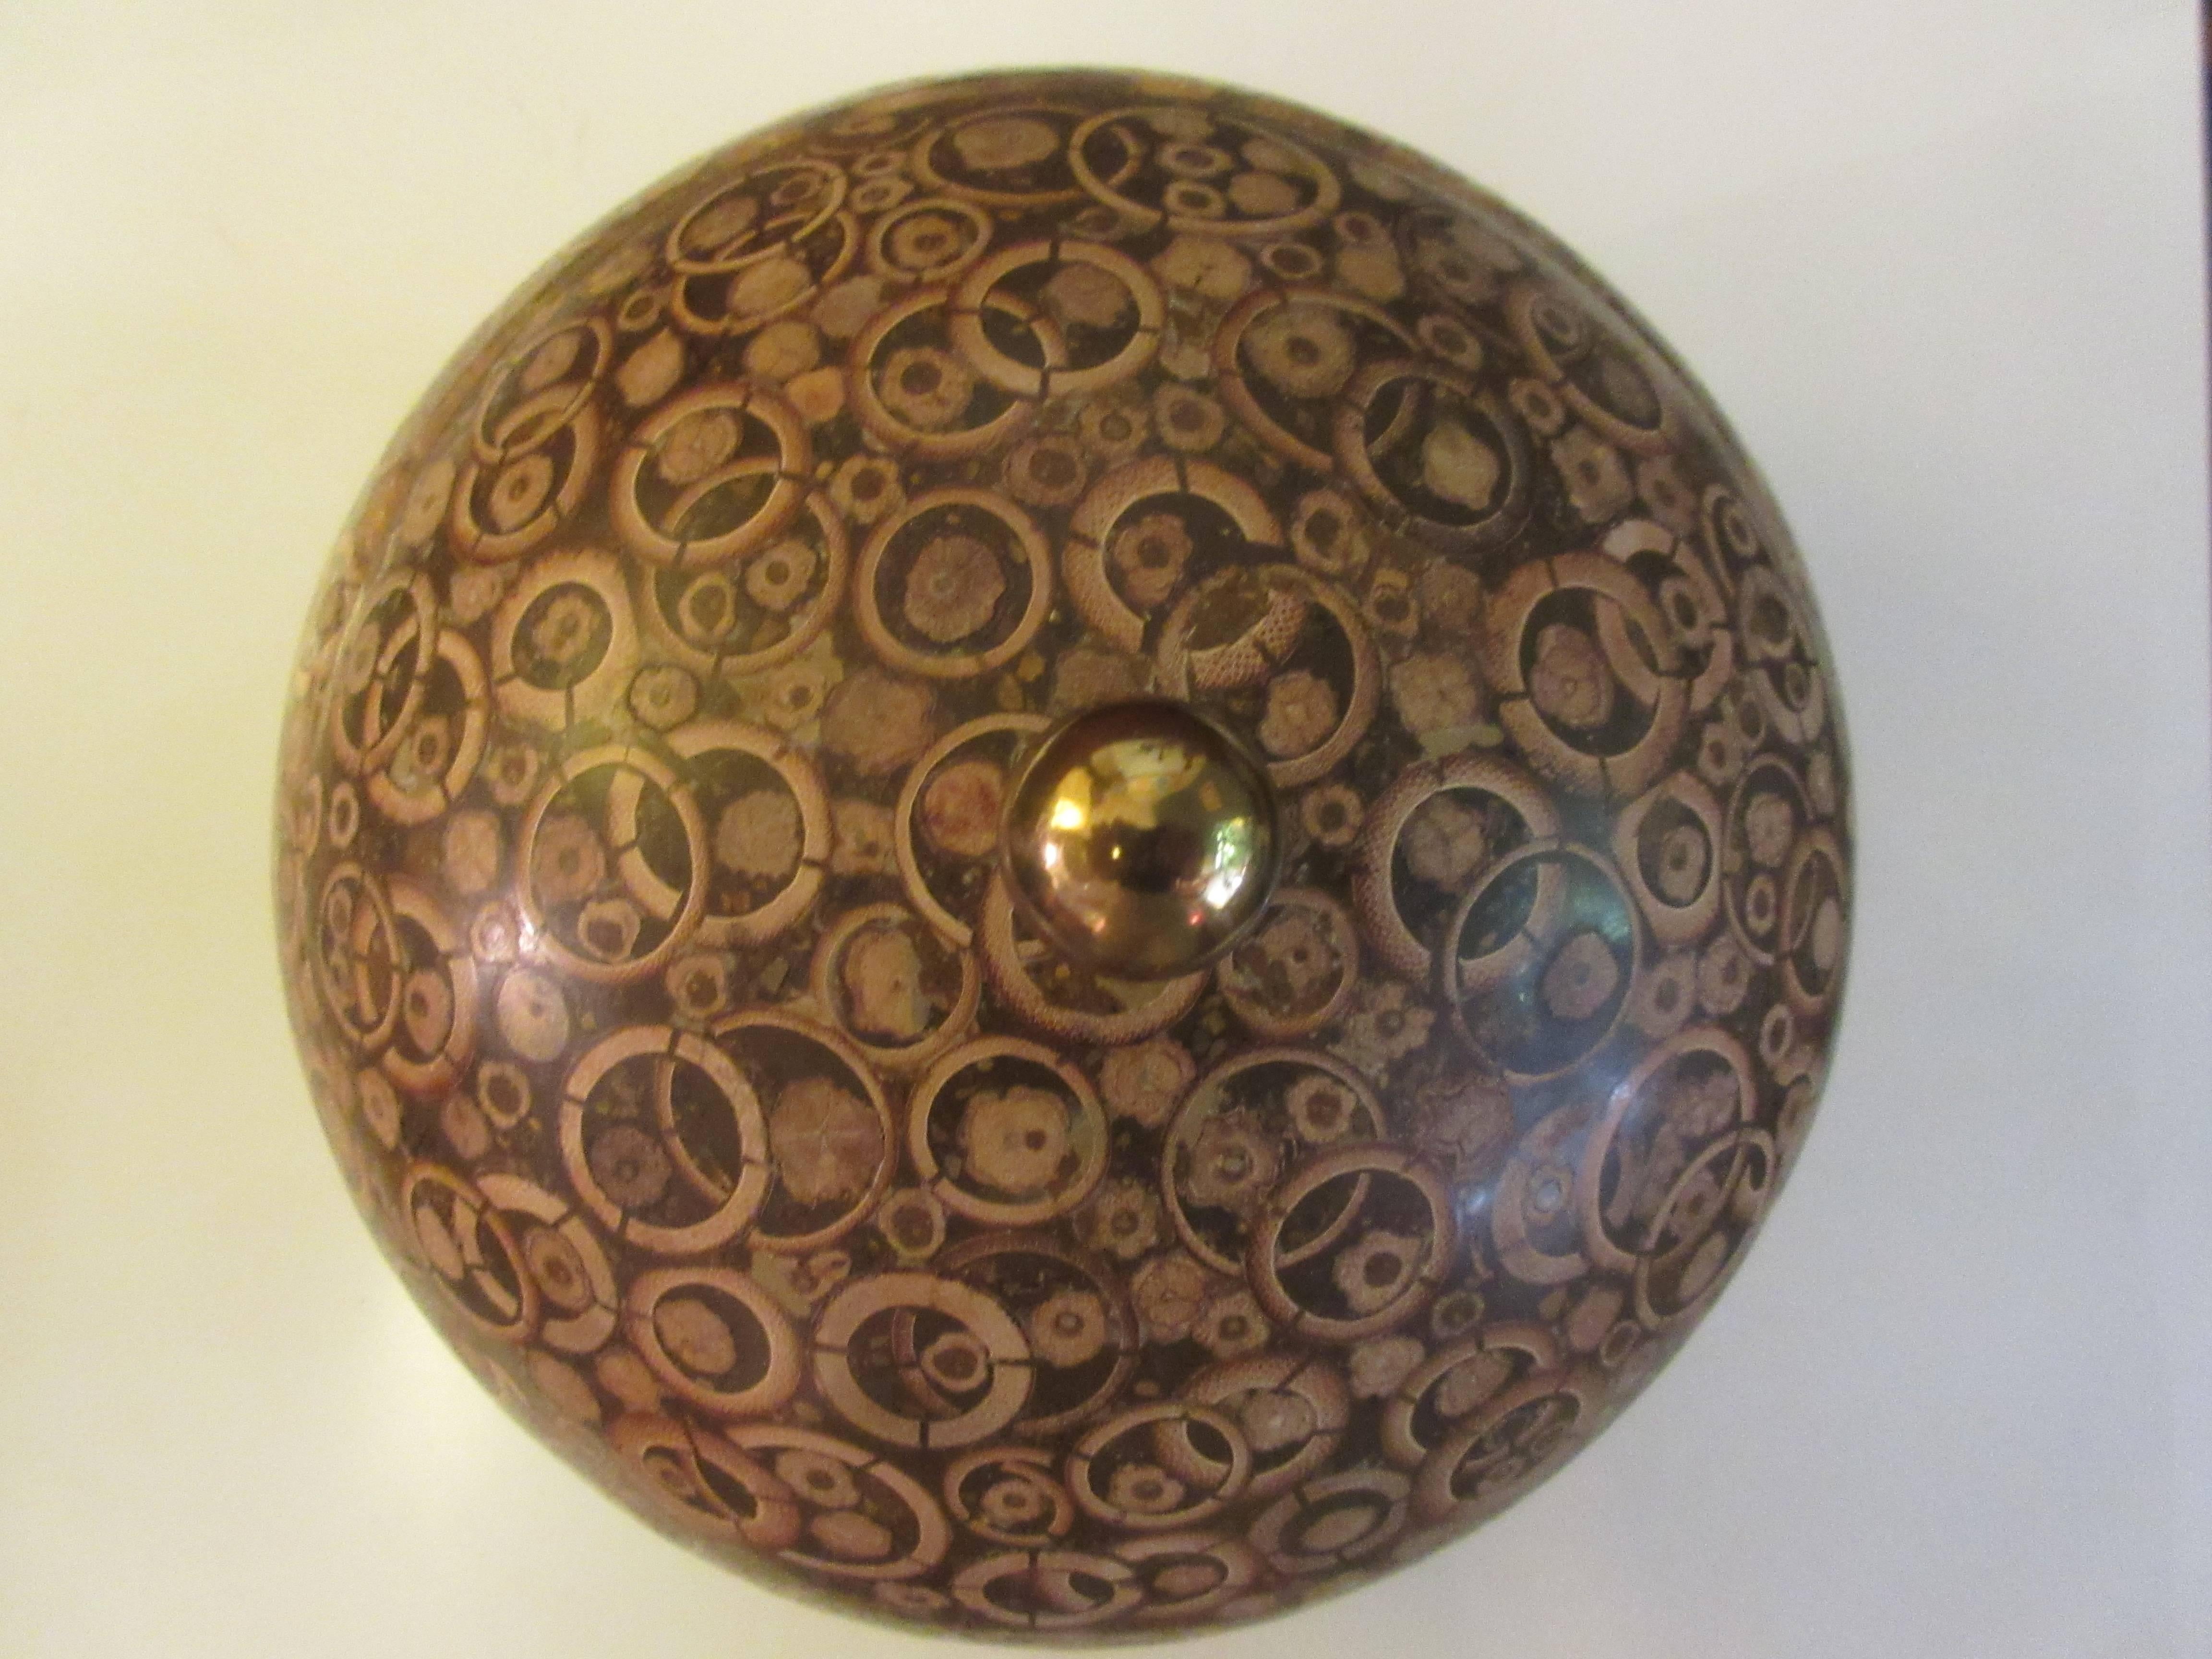 Sphere humidor covered in a thin veneer of sliced nuts giving a very unusual appearance. Retains original label.